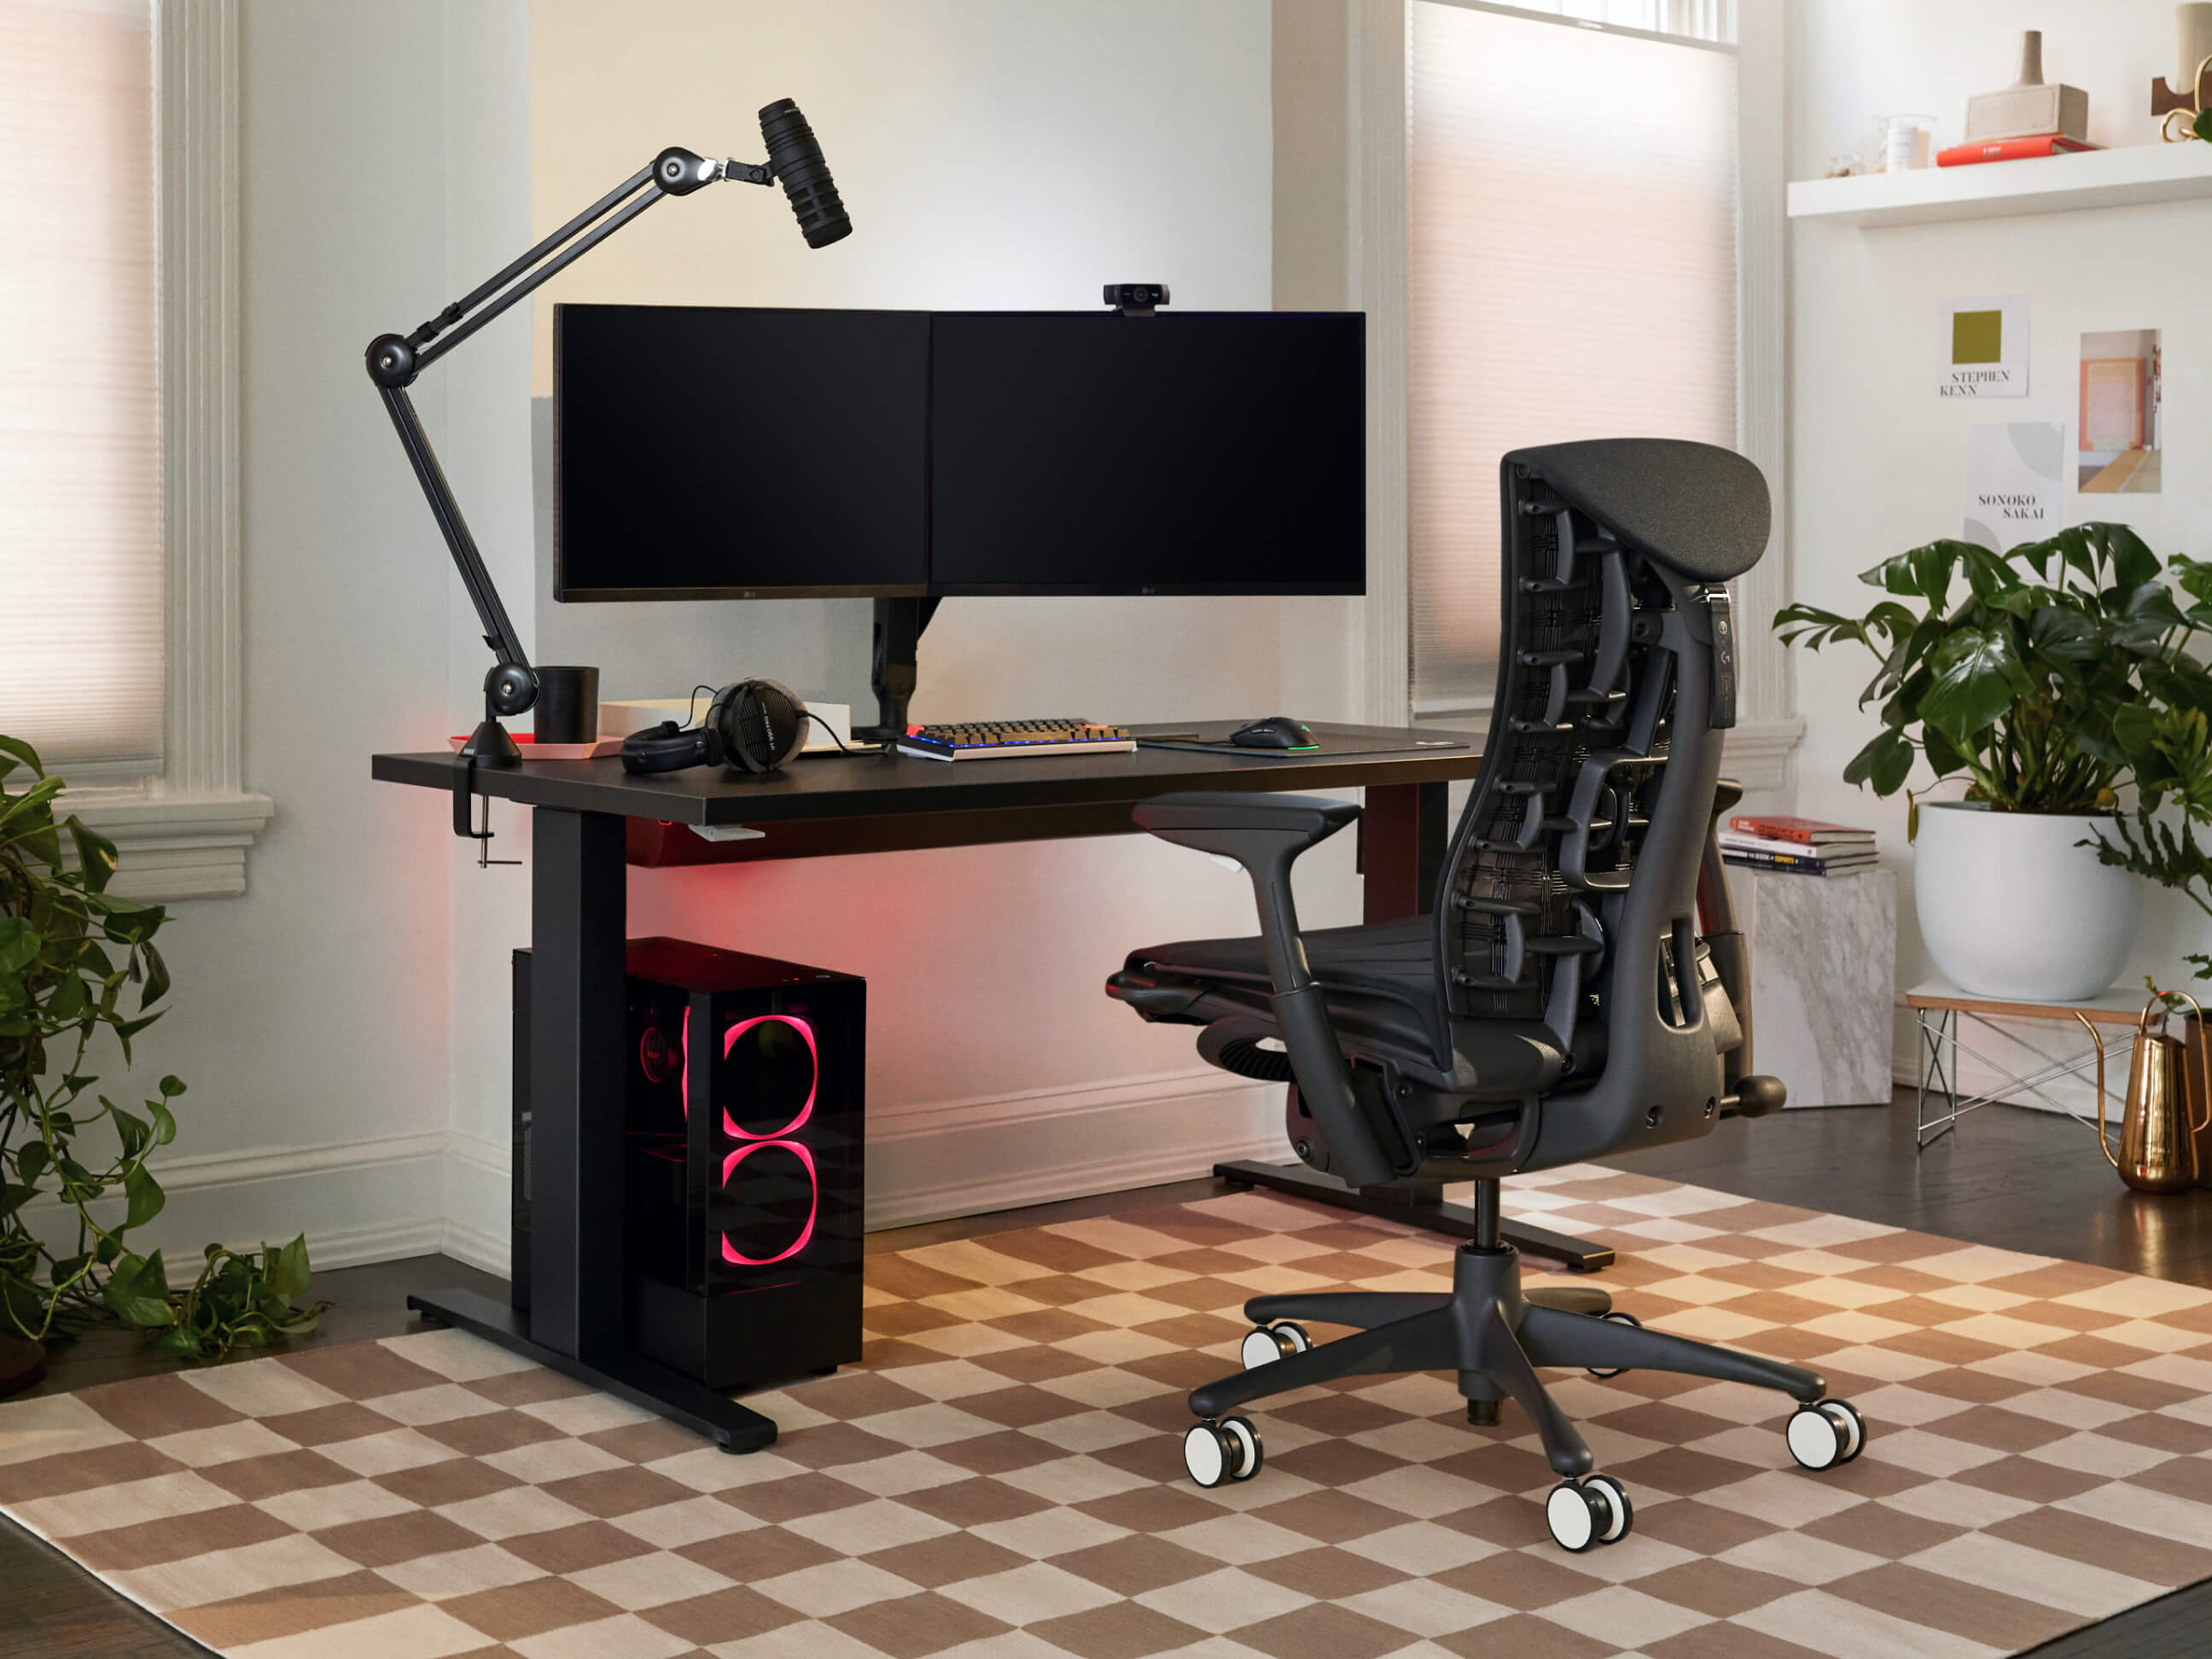 Fully ergonomic gaming setup with a slim, futuristic gaming chair and sit-to-stand gaming desk.